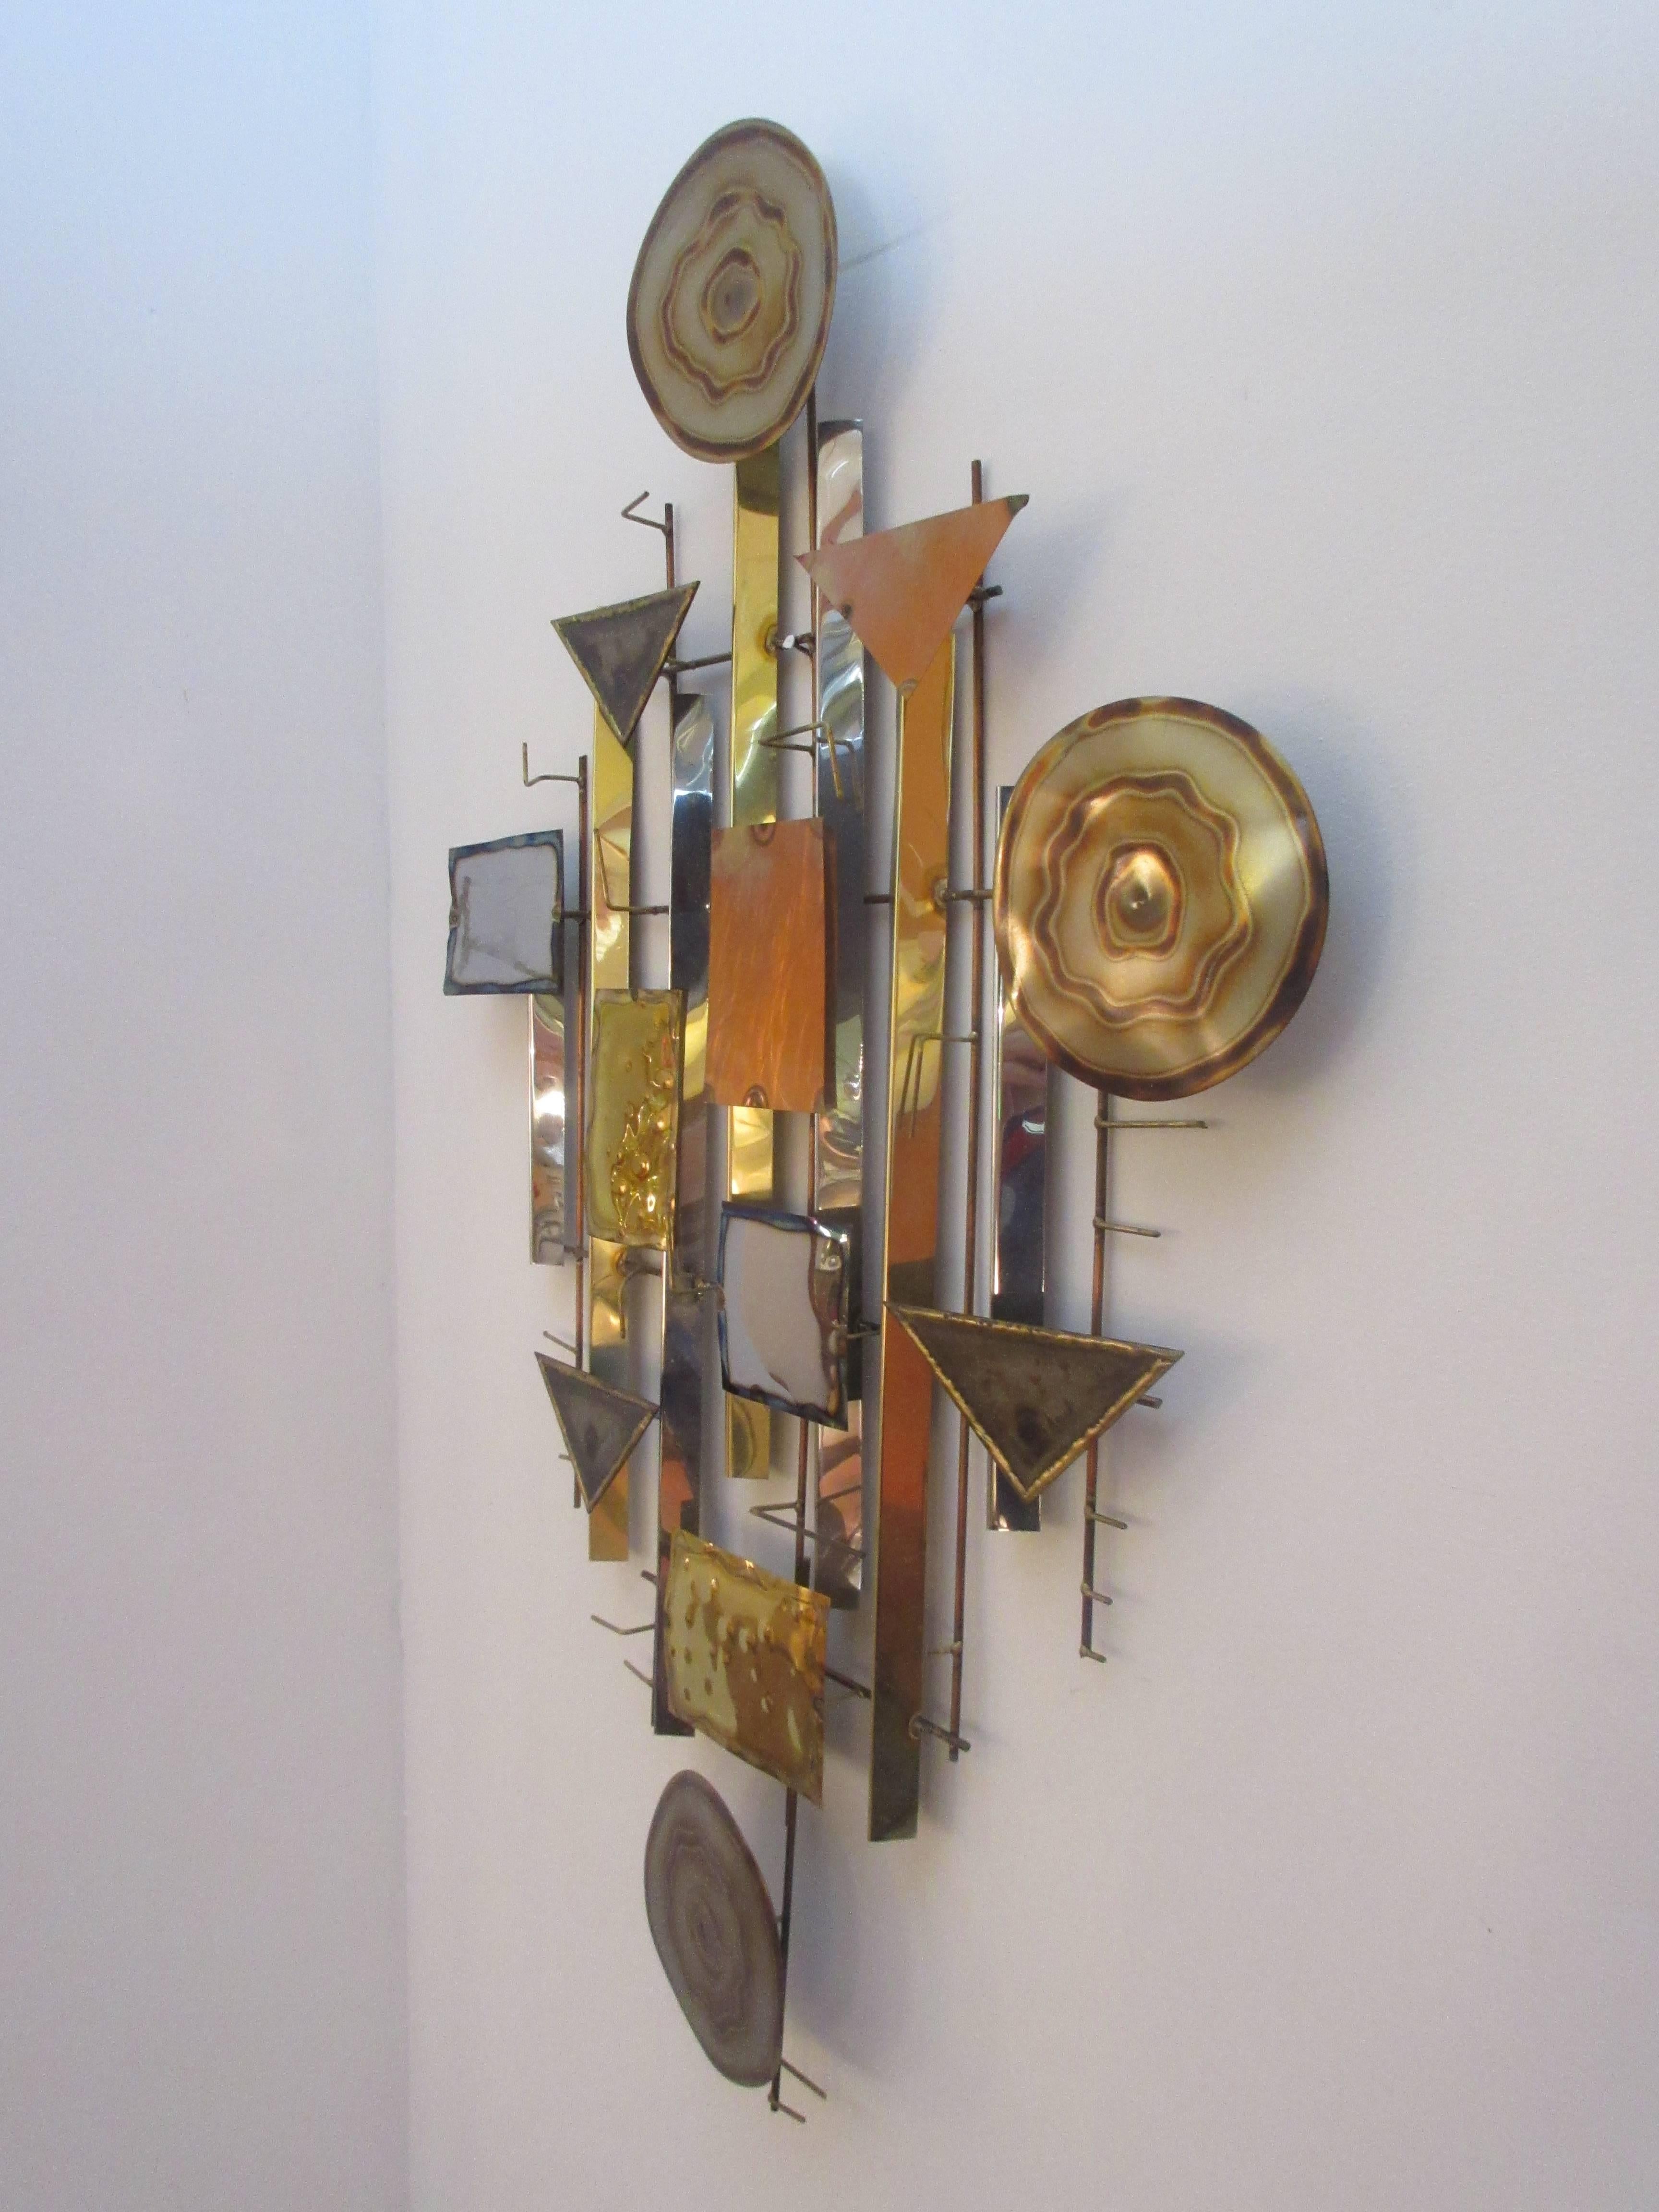 Abstract metal wall sculpture in the style if C. Jere with an indecipherable signature shown on last picture. Sculpture consists of triangles, rectangles, and circles of burnished brass, copper and sheet metal held together with a round brass wire.